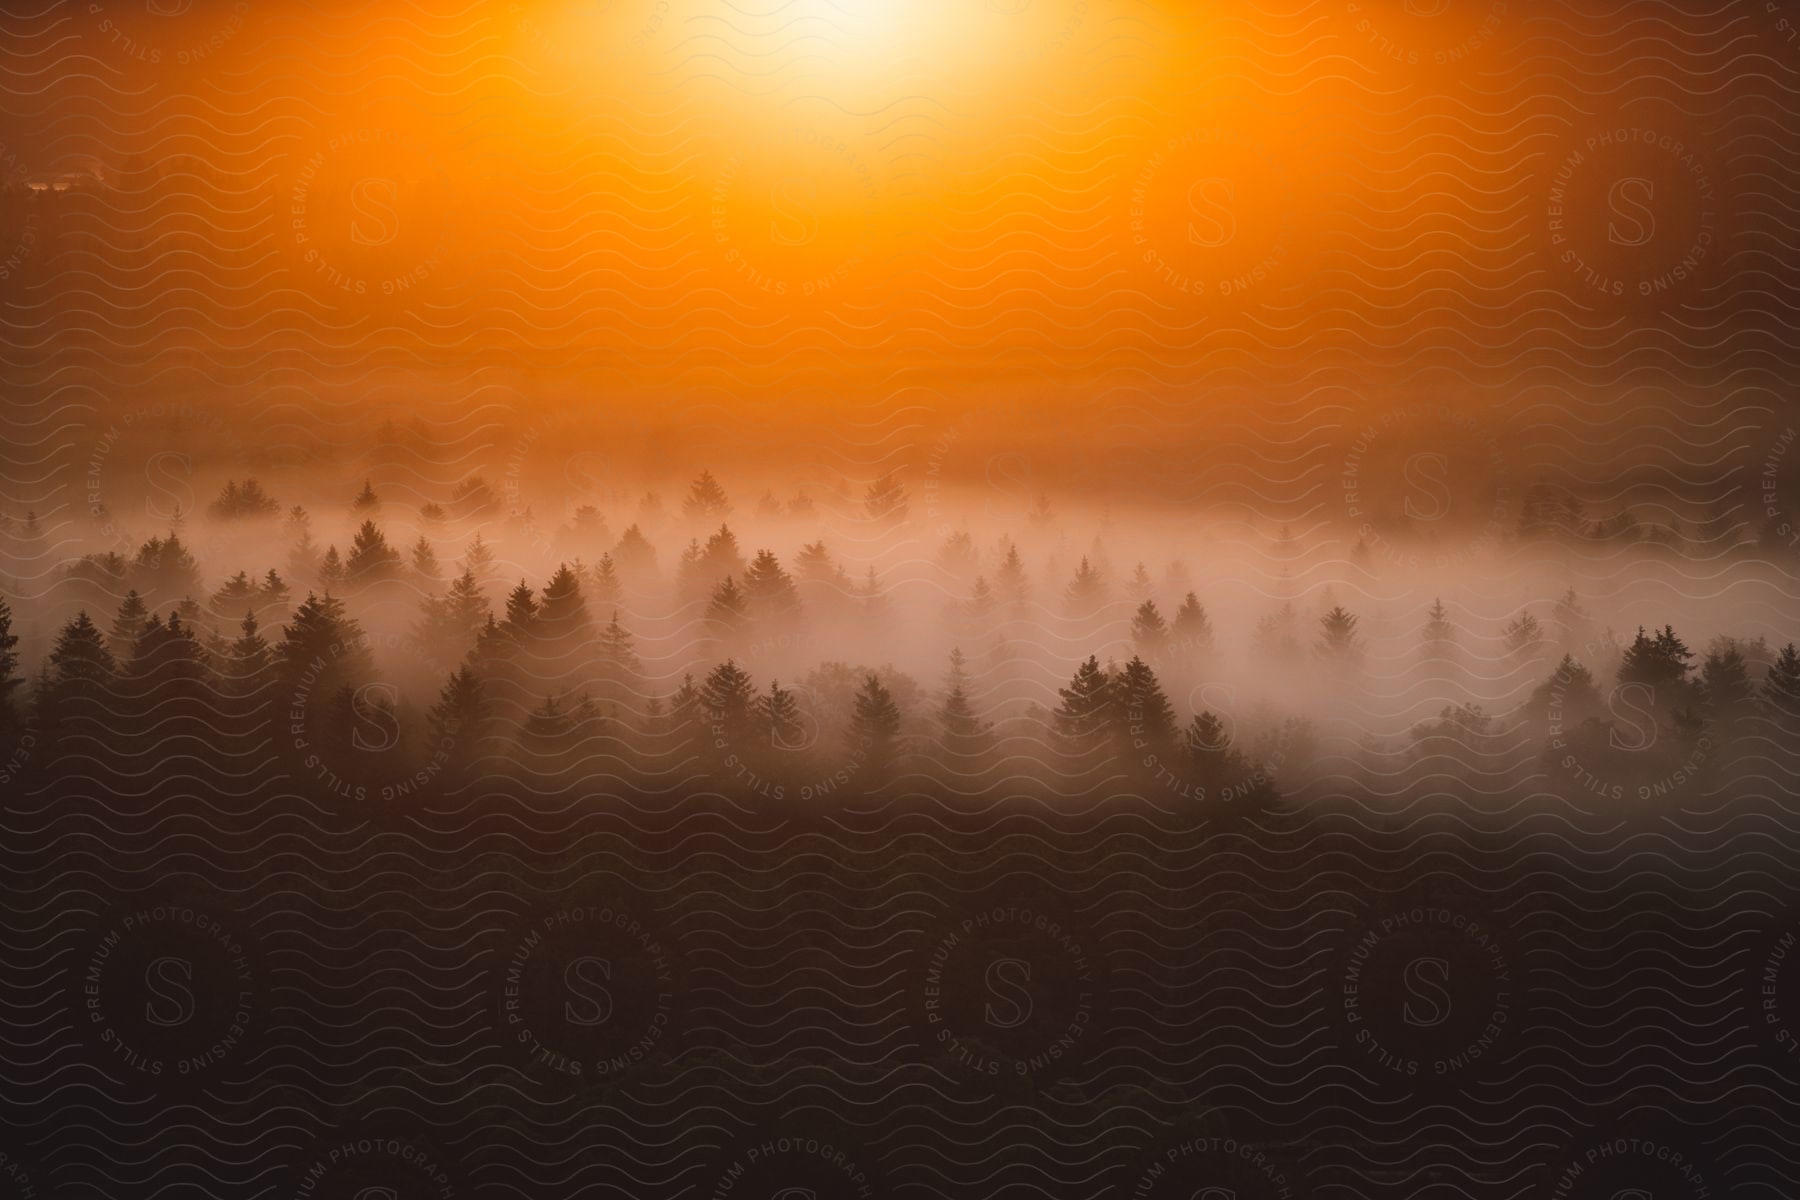 Stock photo of mist covers the treetops of a forest as the sun shines brightly overhead